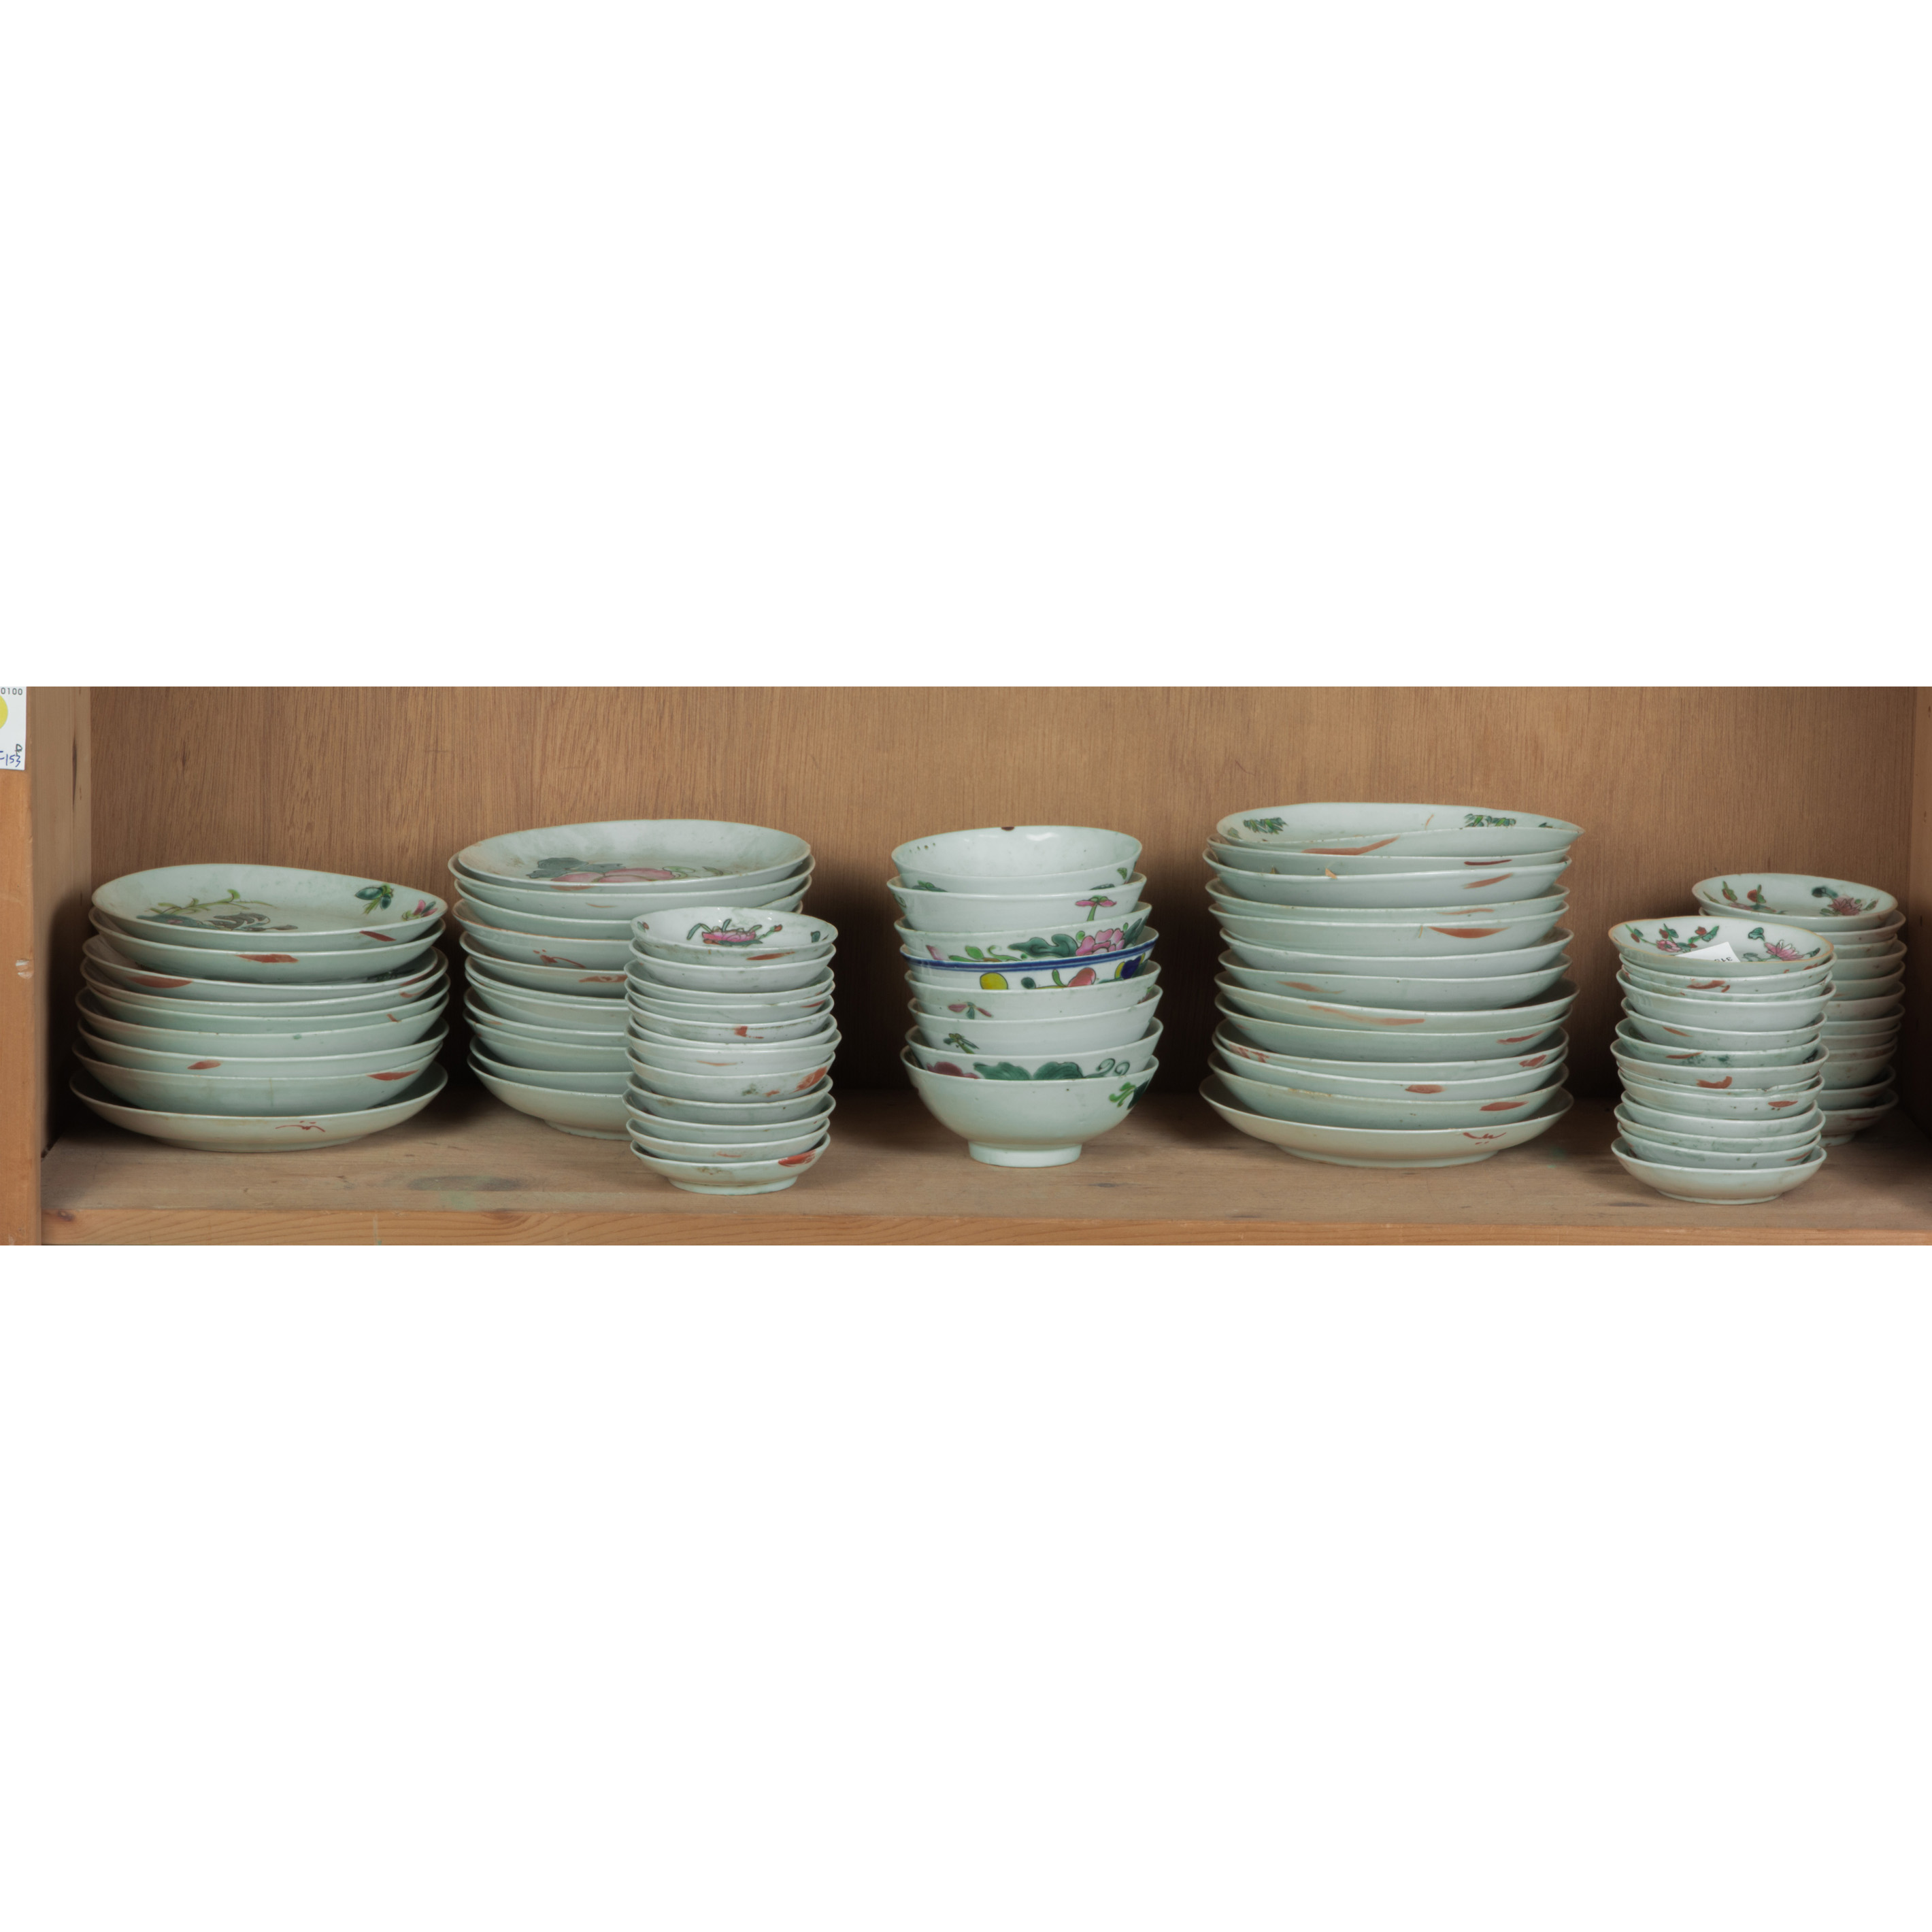 SHELF OF CHINESE FAMILLE ROSE DISHES 3a452c